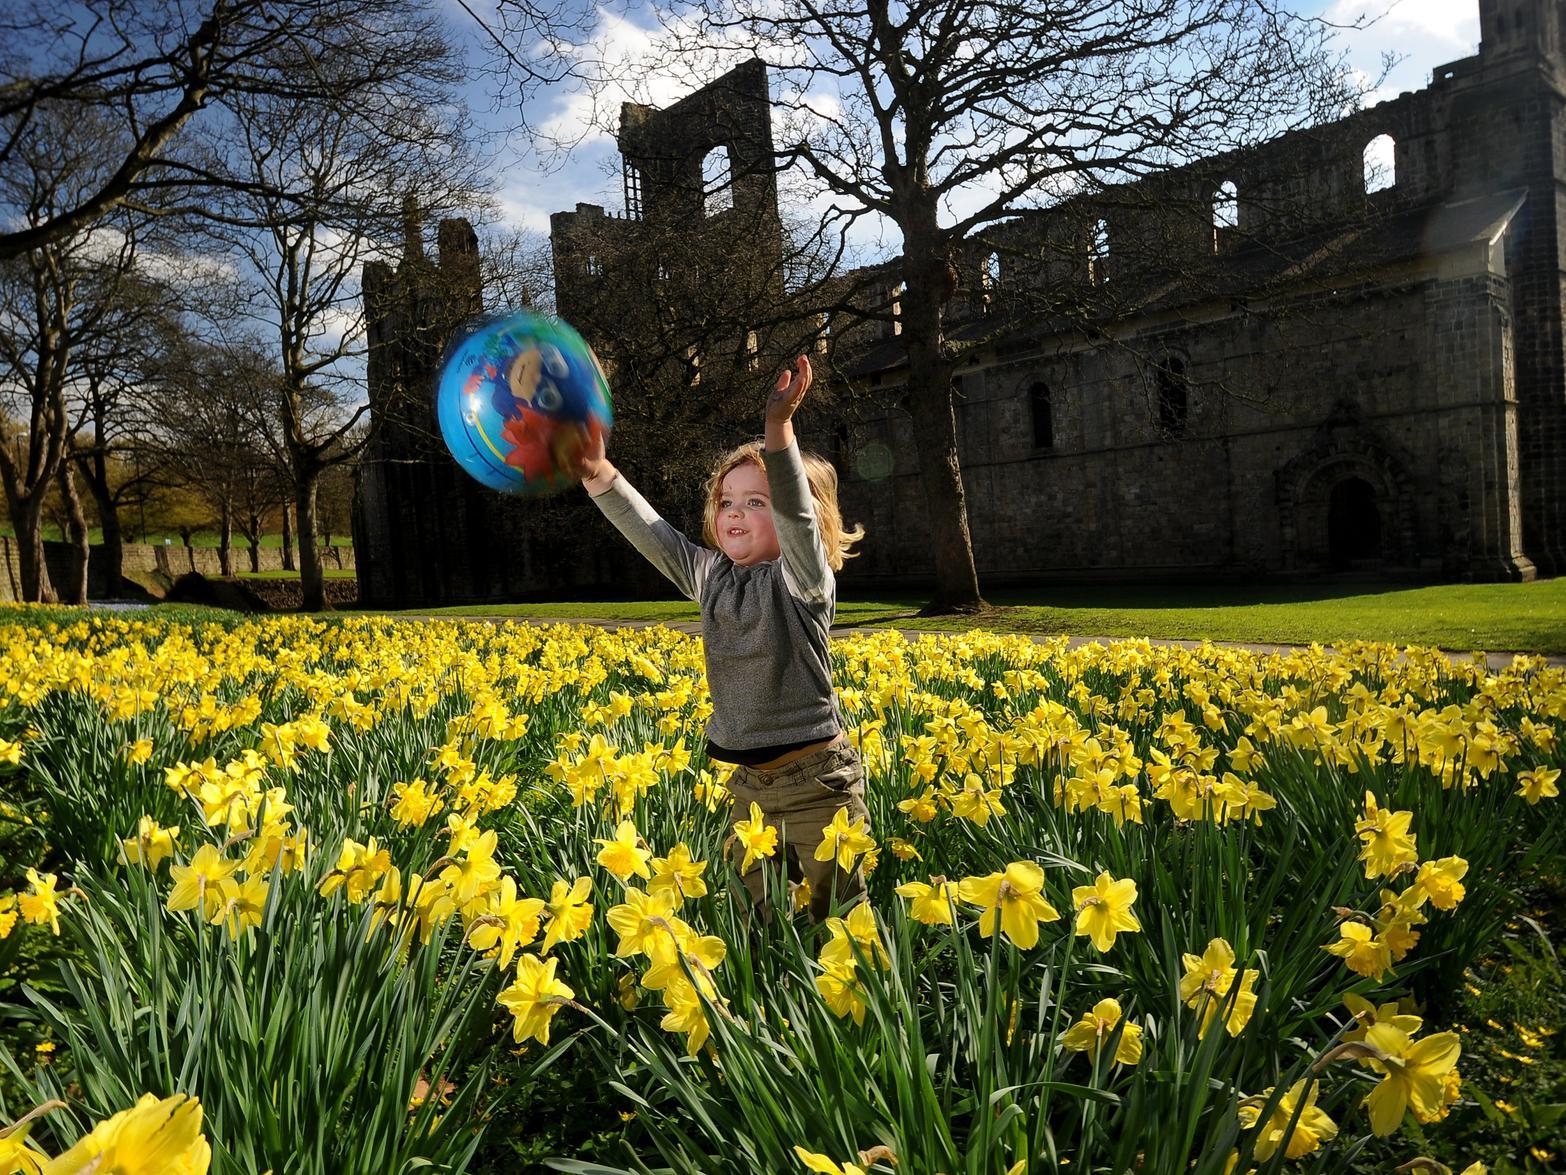 Spring had sprung at Kirkstall Abbey as three-year-old Byron Lee plays with his ball pictured among the daffodils.